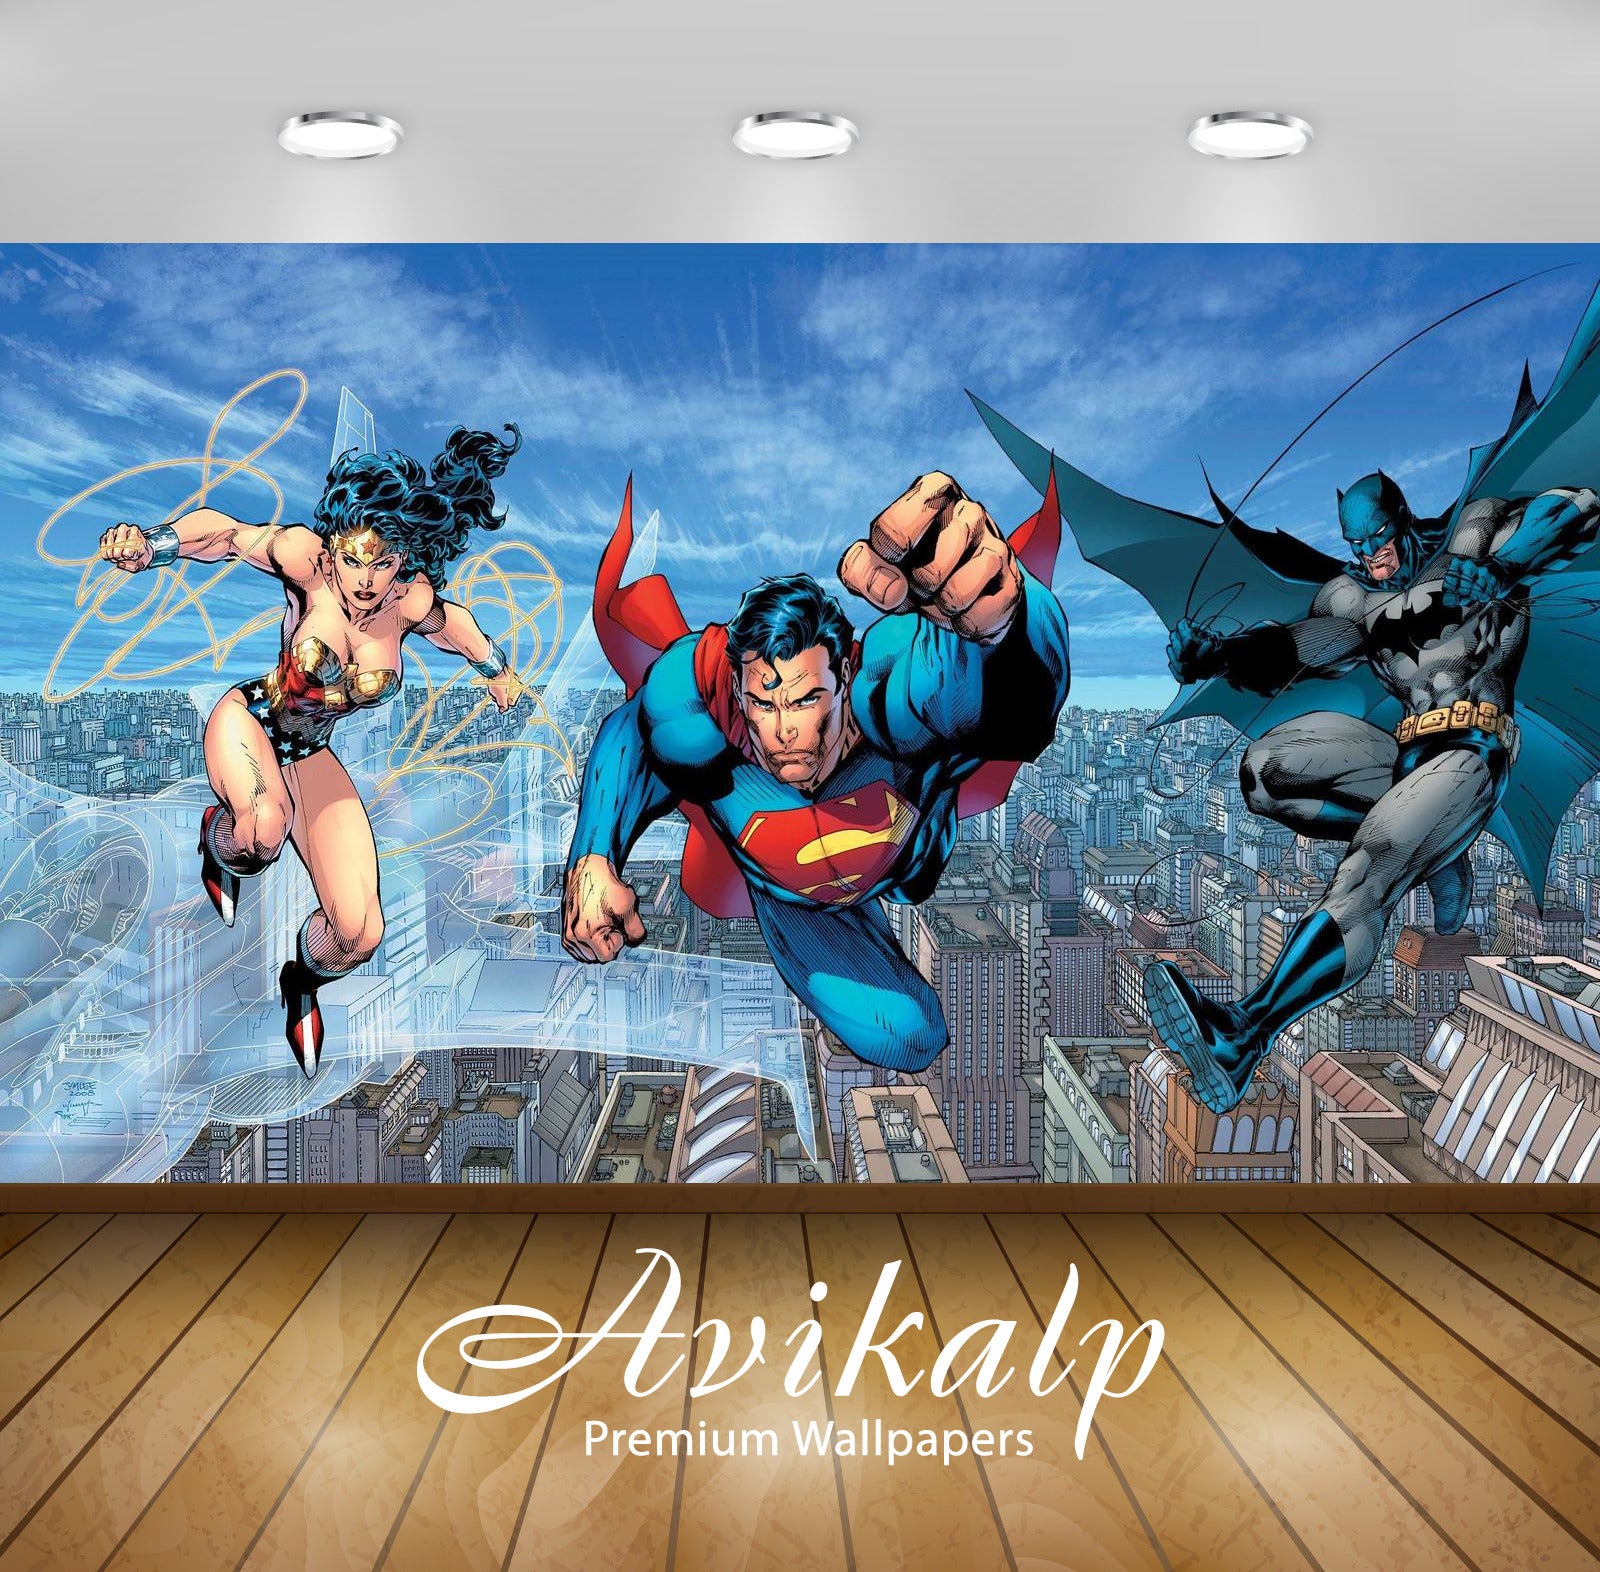 Avikalp Exclusive Superman Batman AWI1225 HD Wallpapers for Living room, Hall, Kids Room, Kitchen, T